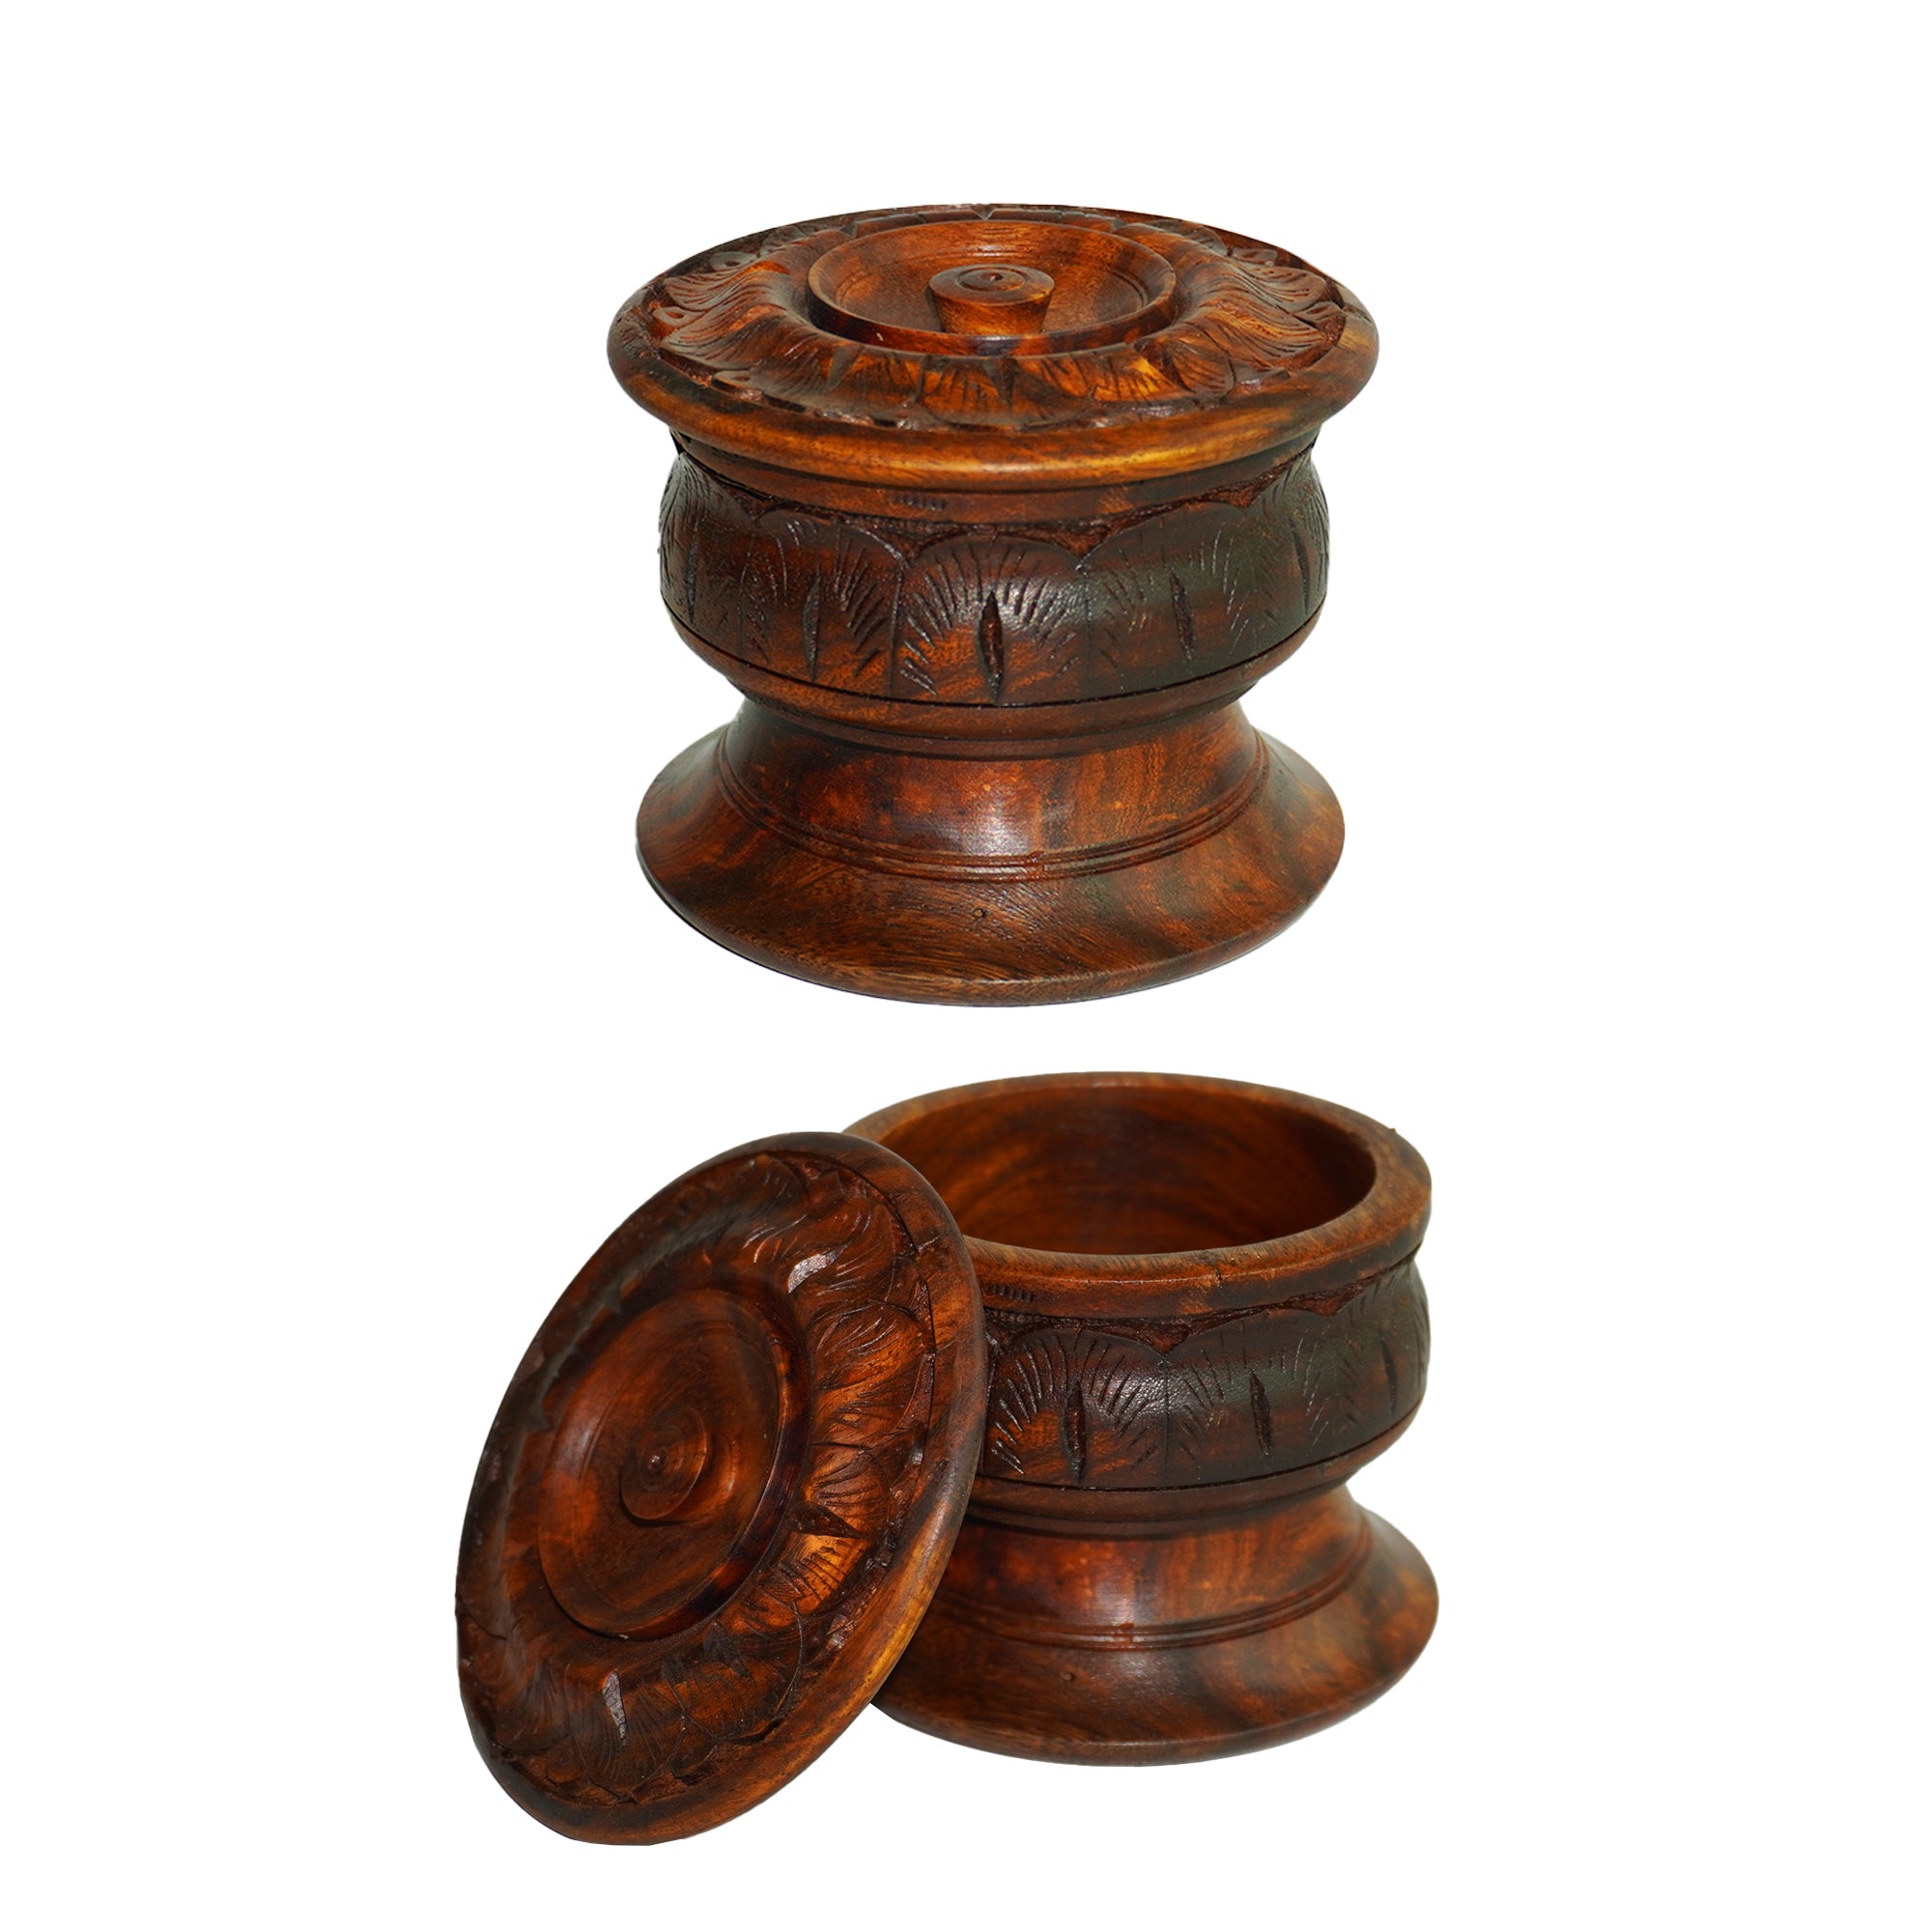 Wooden Sugar Pot - with Stand